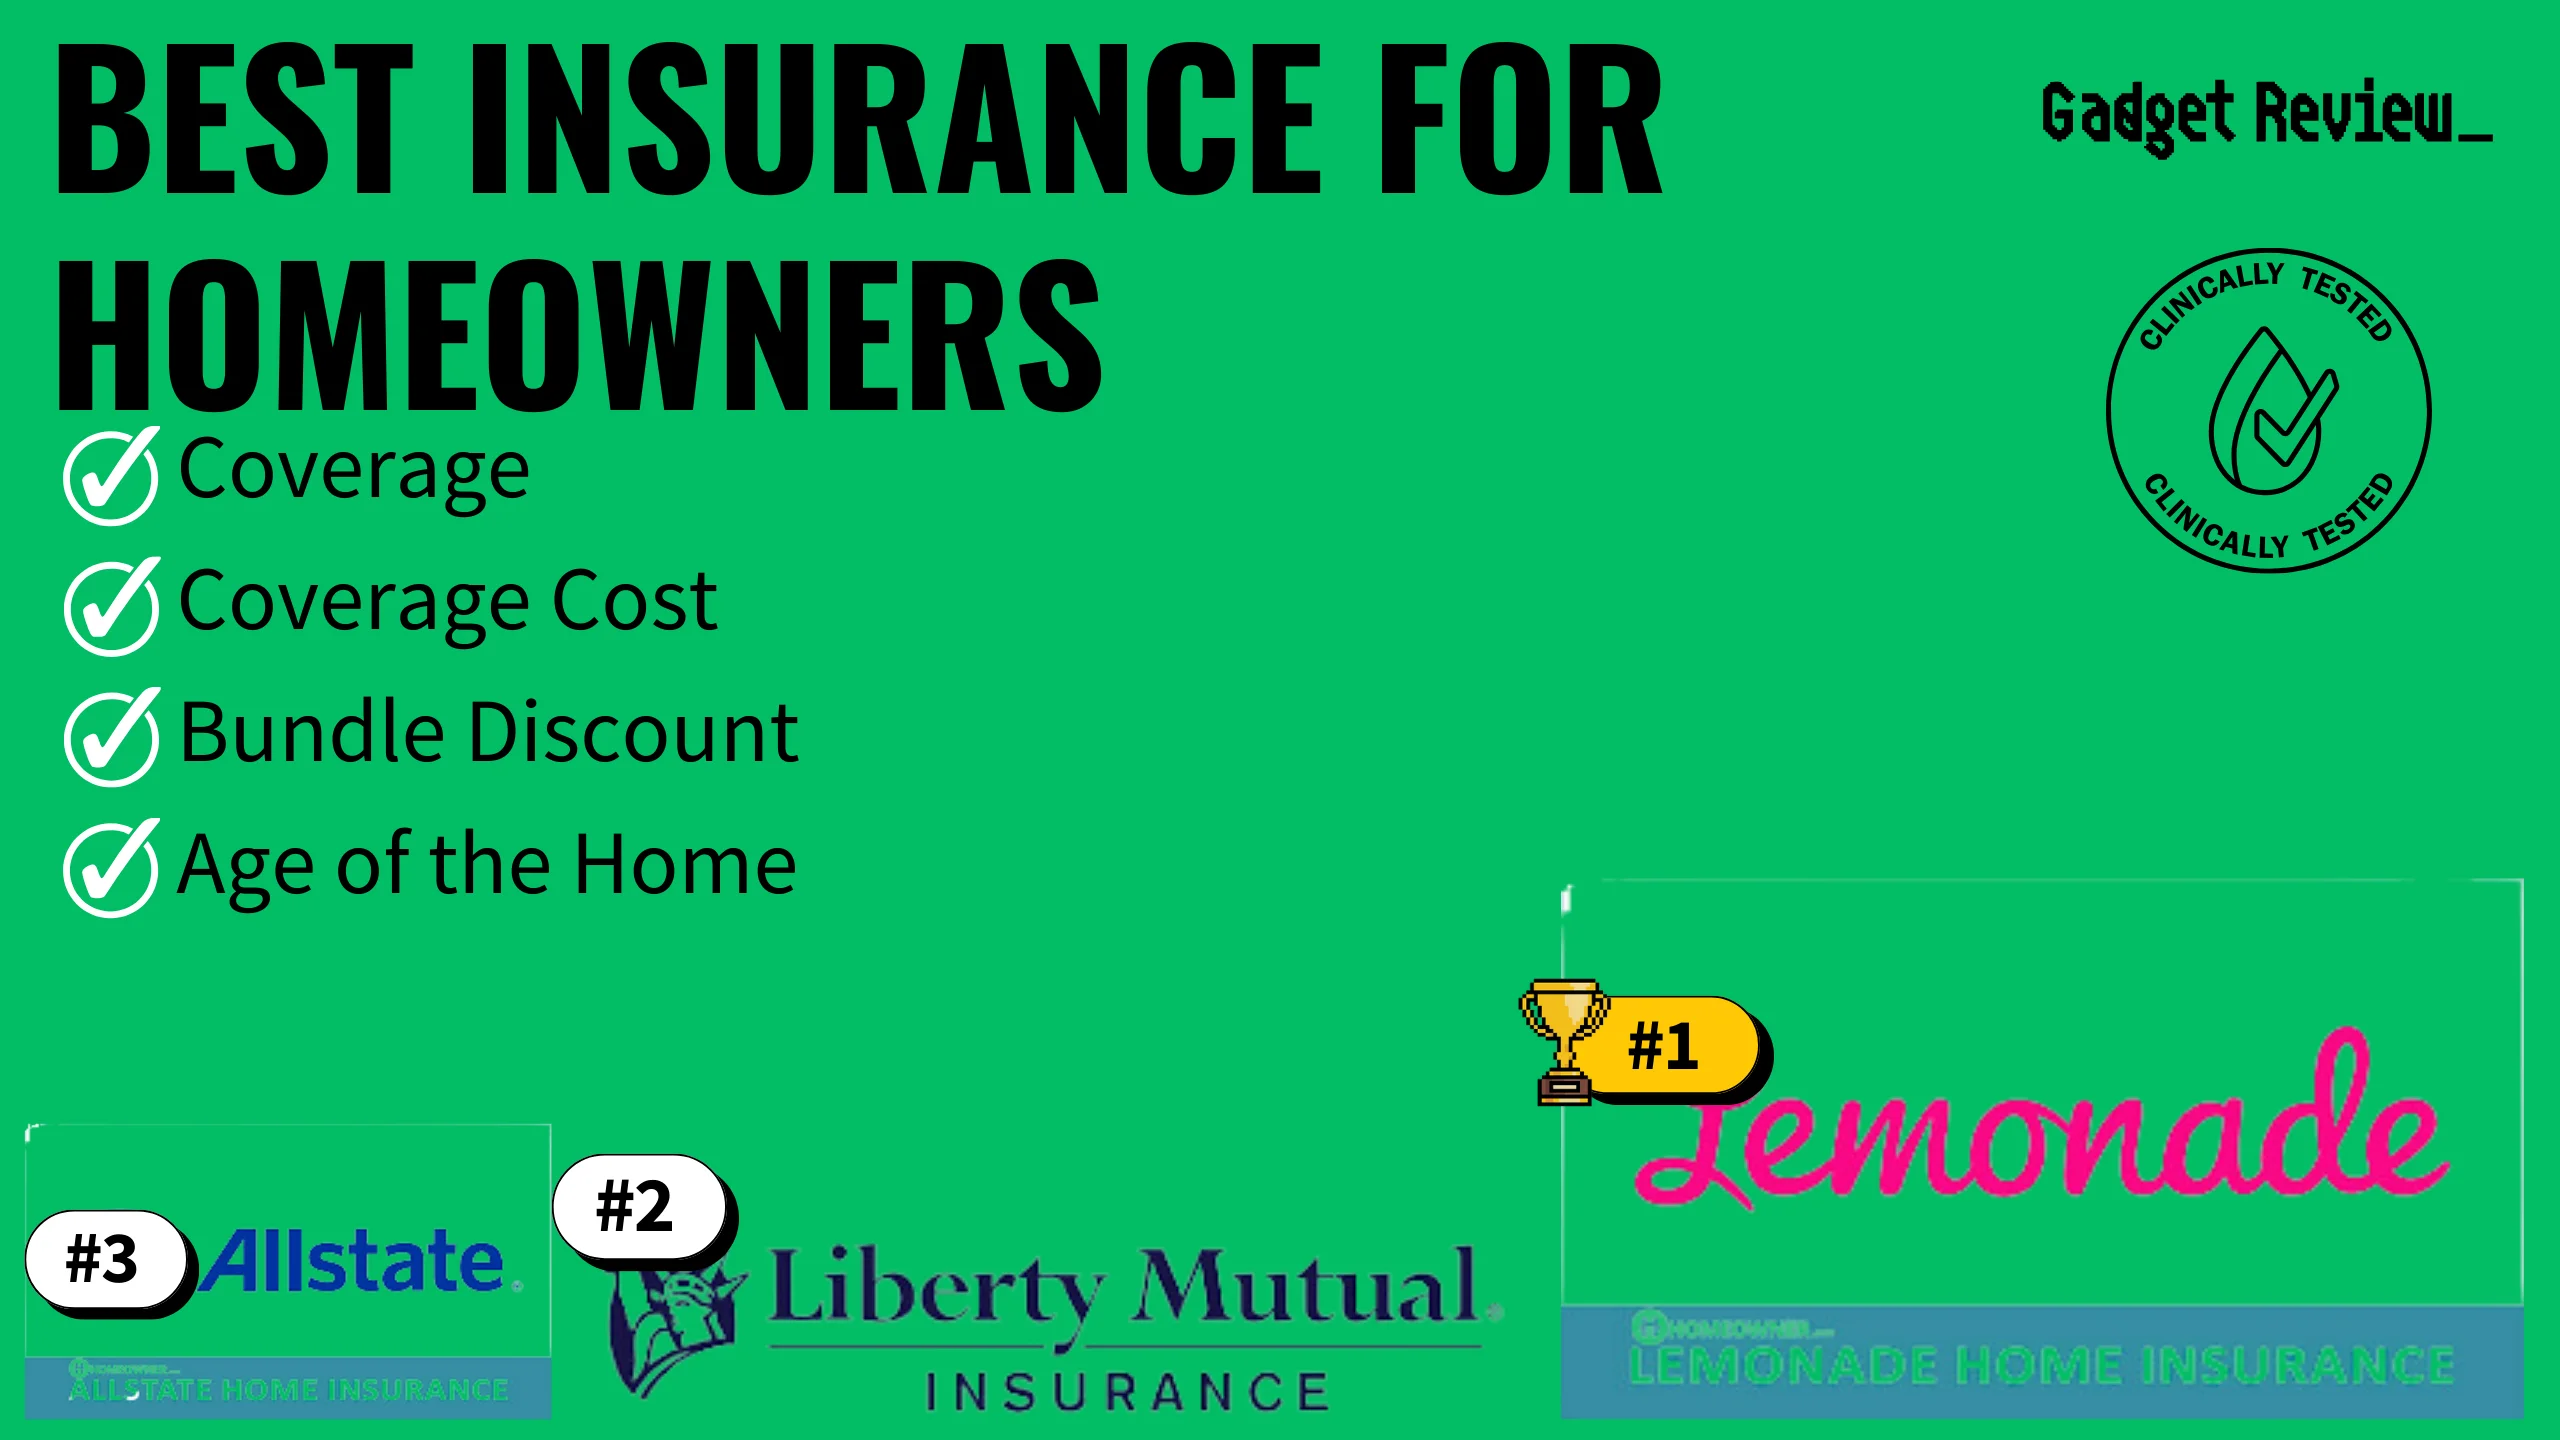 Best Insurance for Homeowners